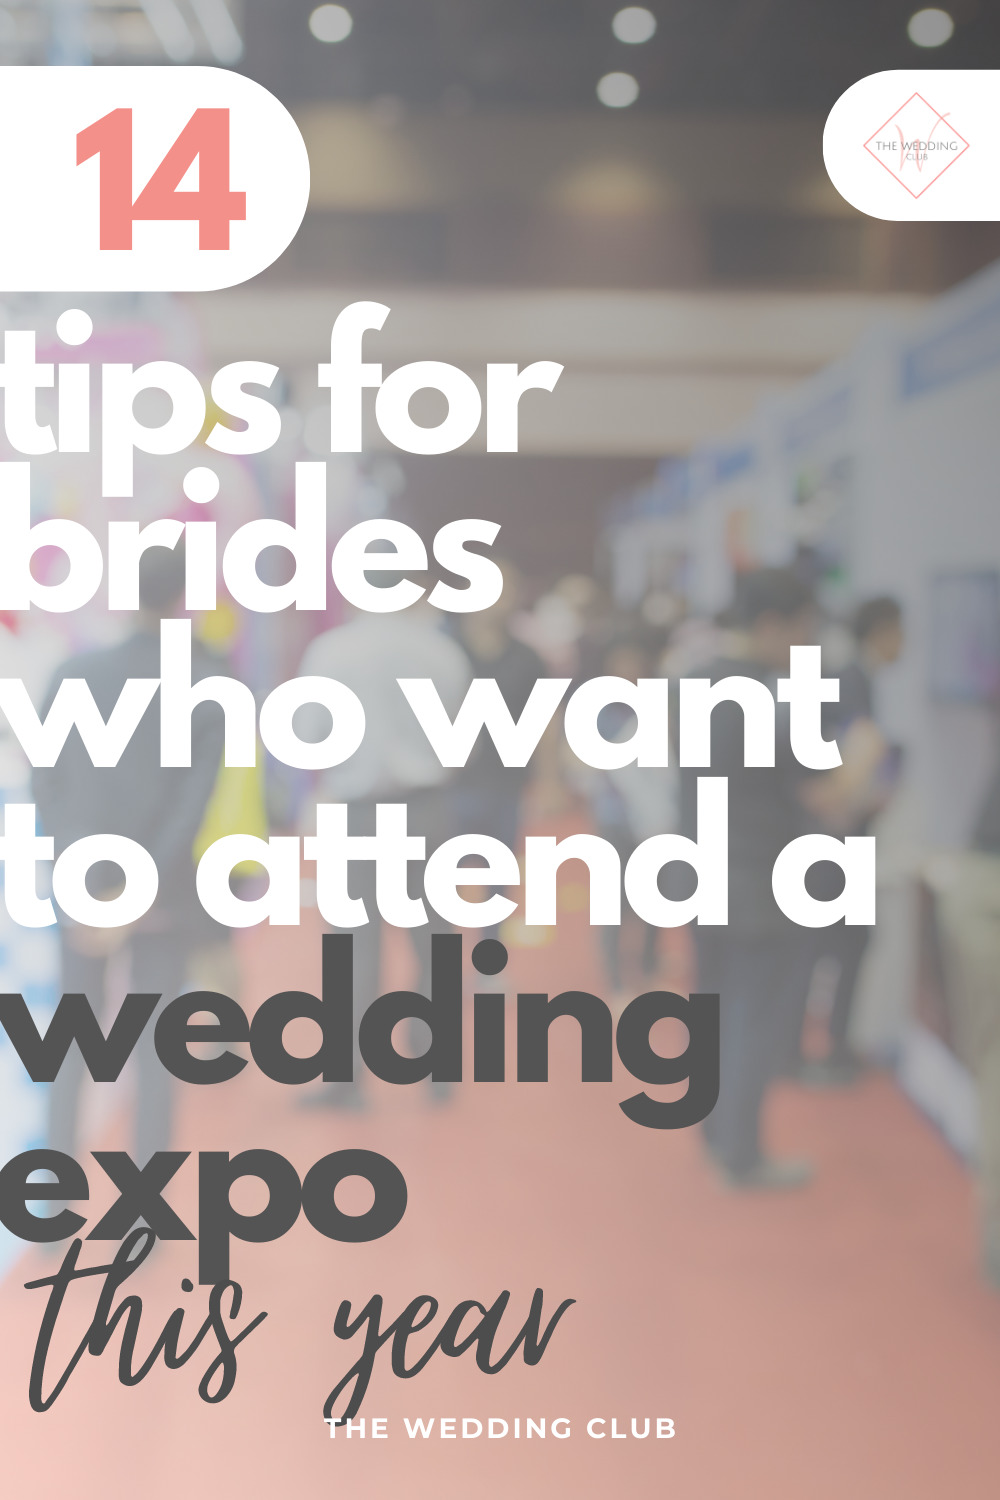 14 Tips for brides who want to attend a wedding expo in 2020